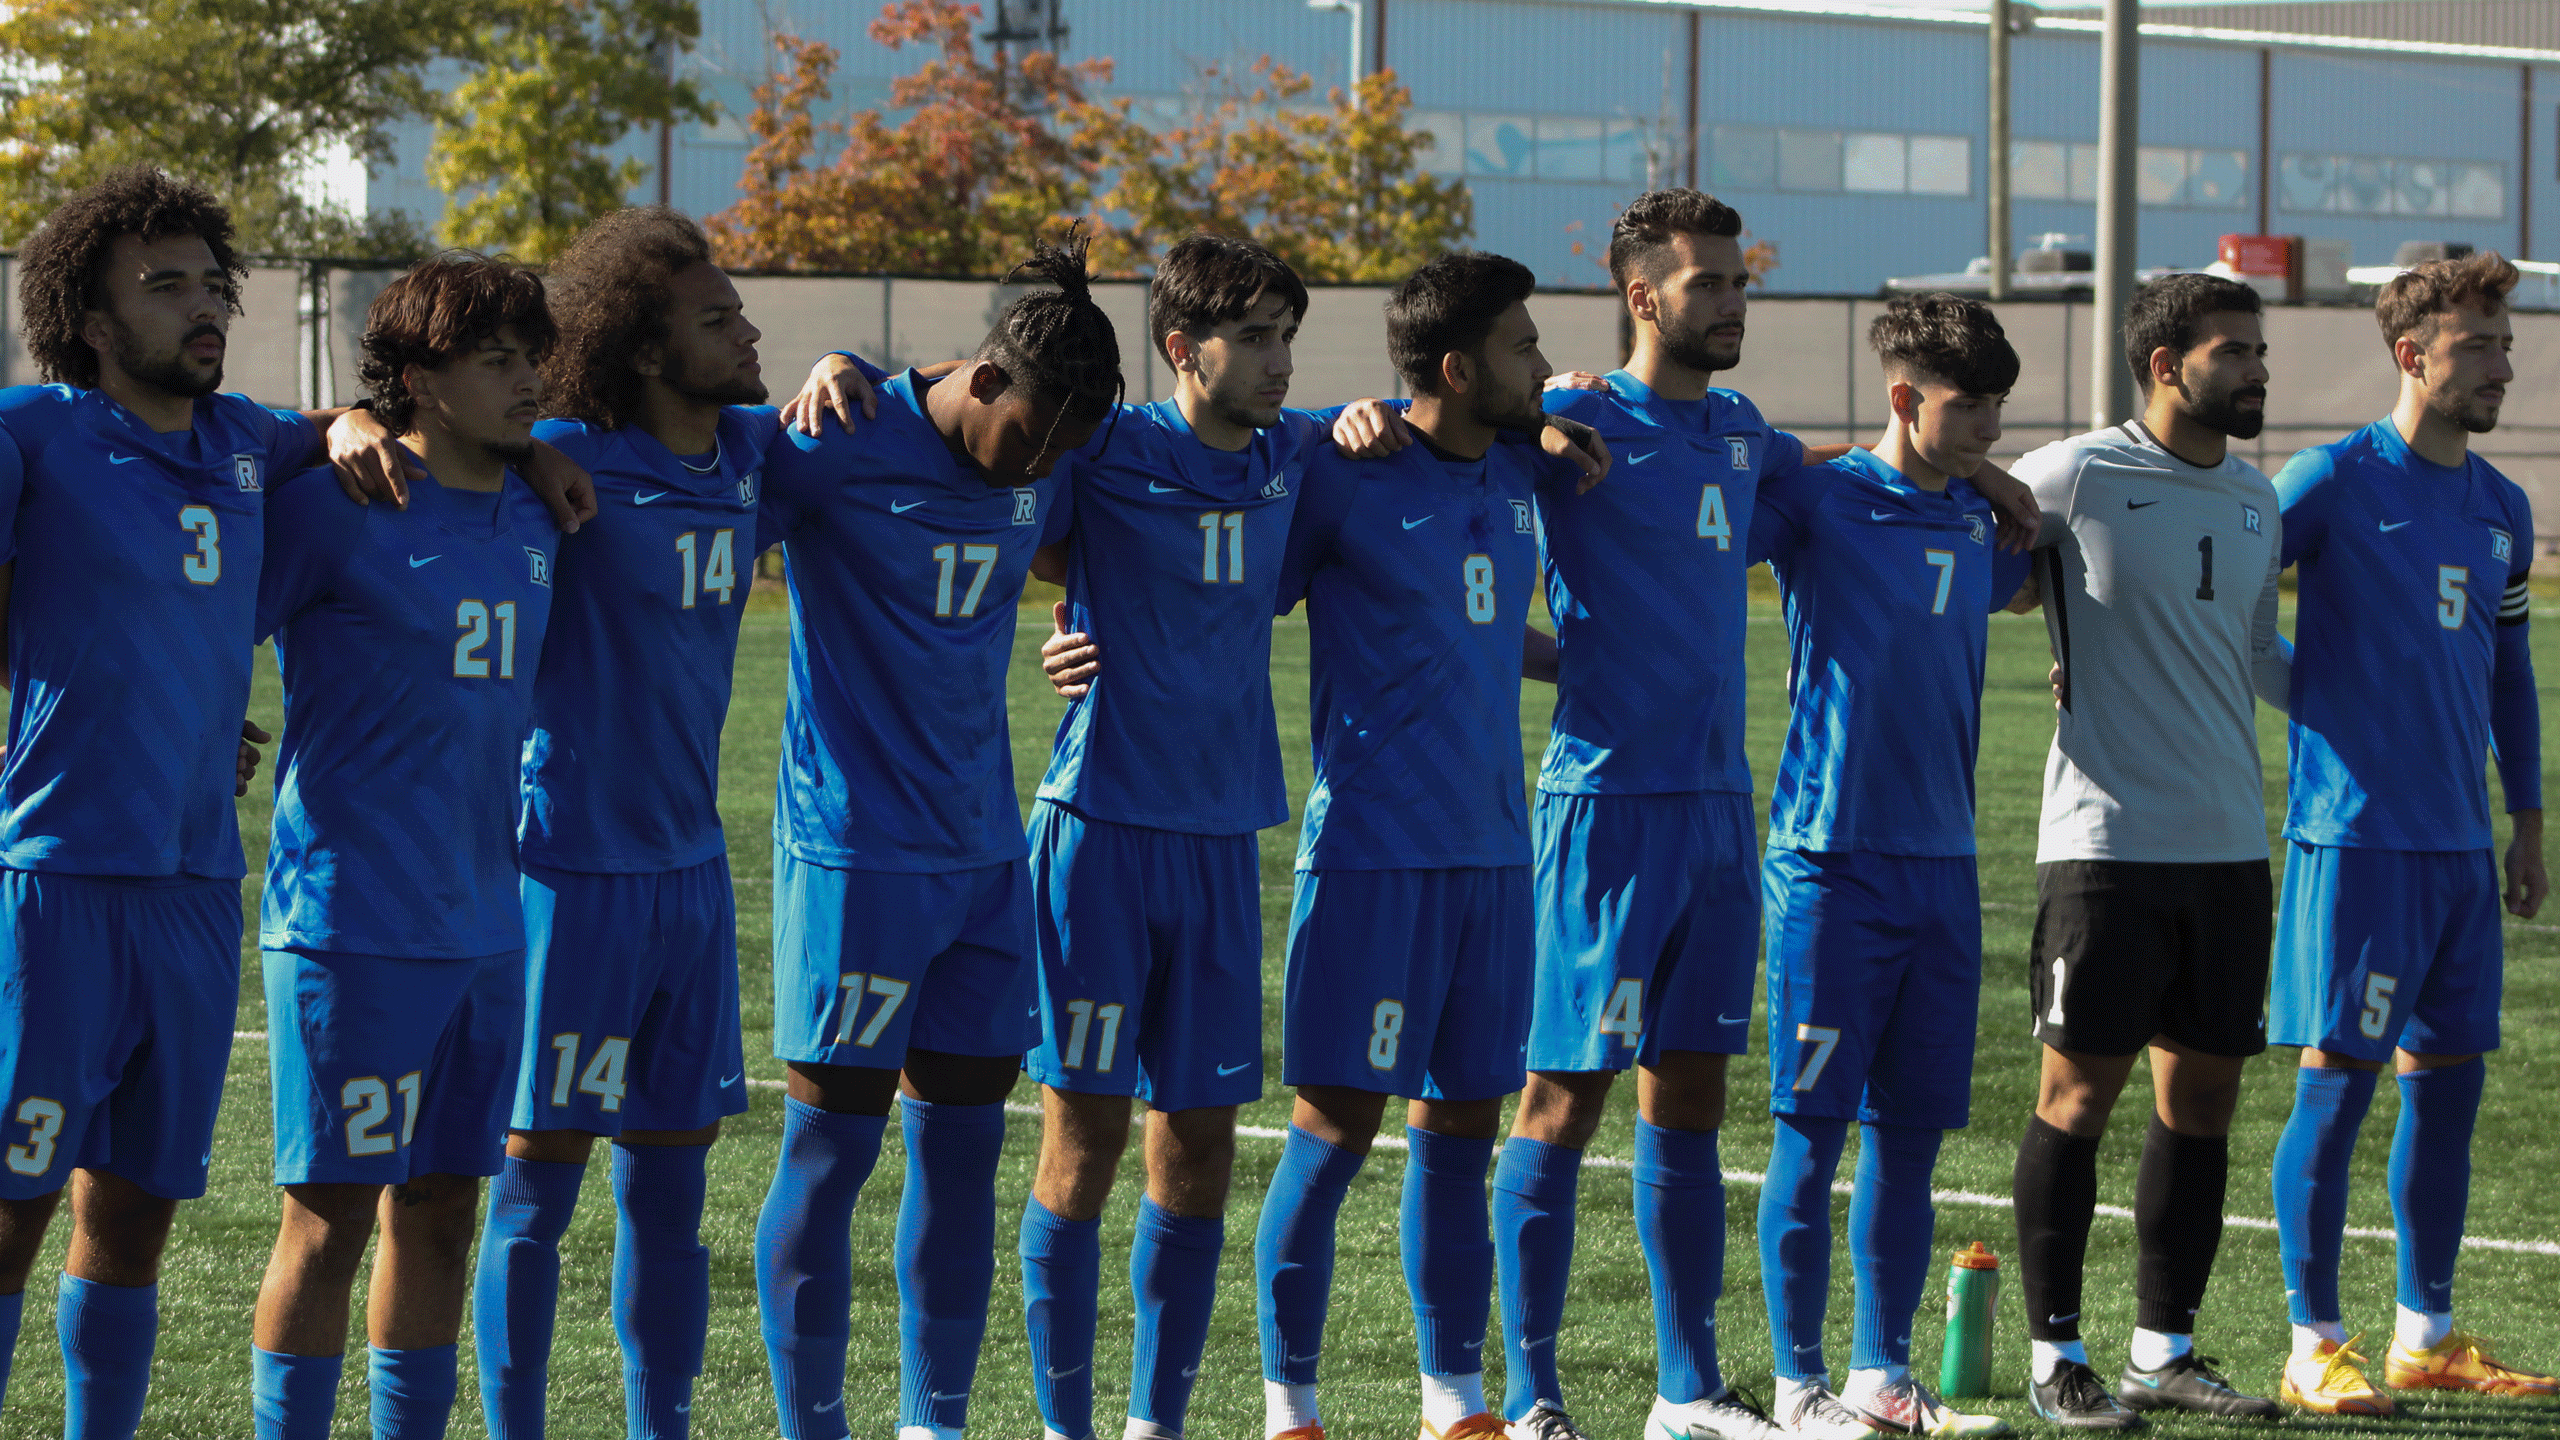 A group of soccer players in blue jerseys huddle together